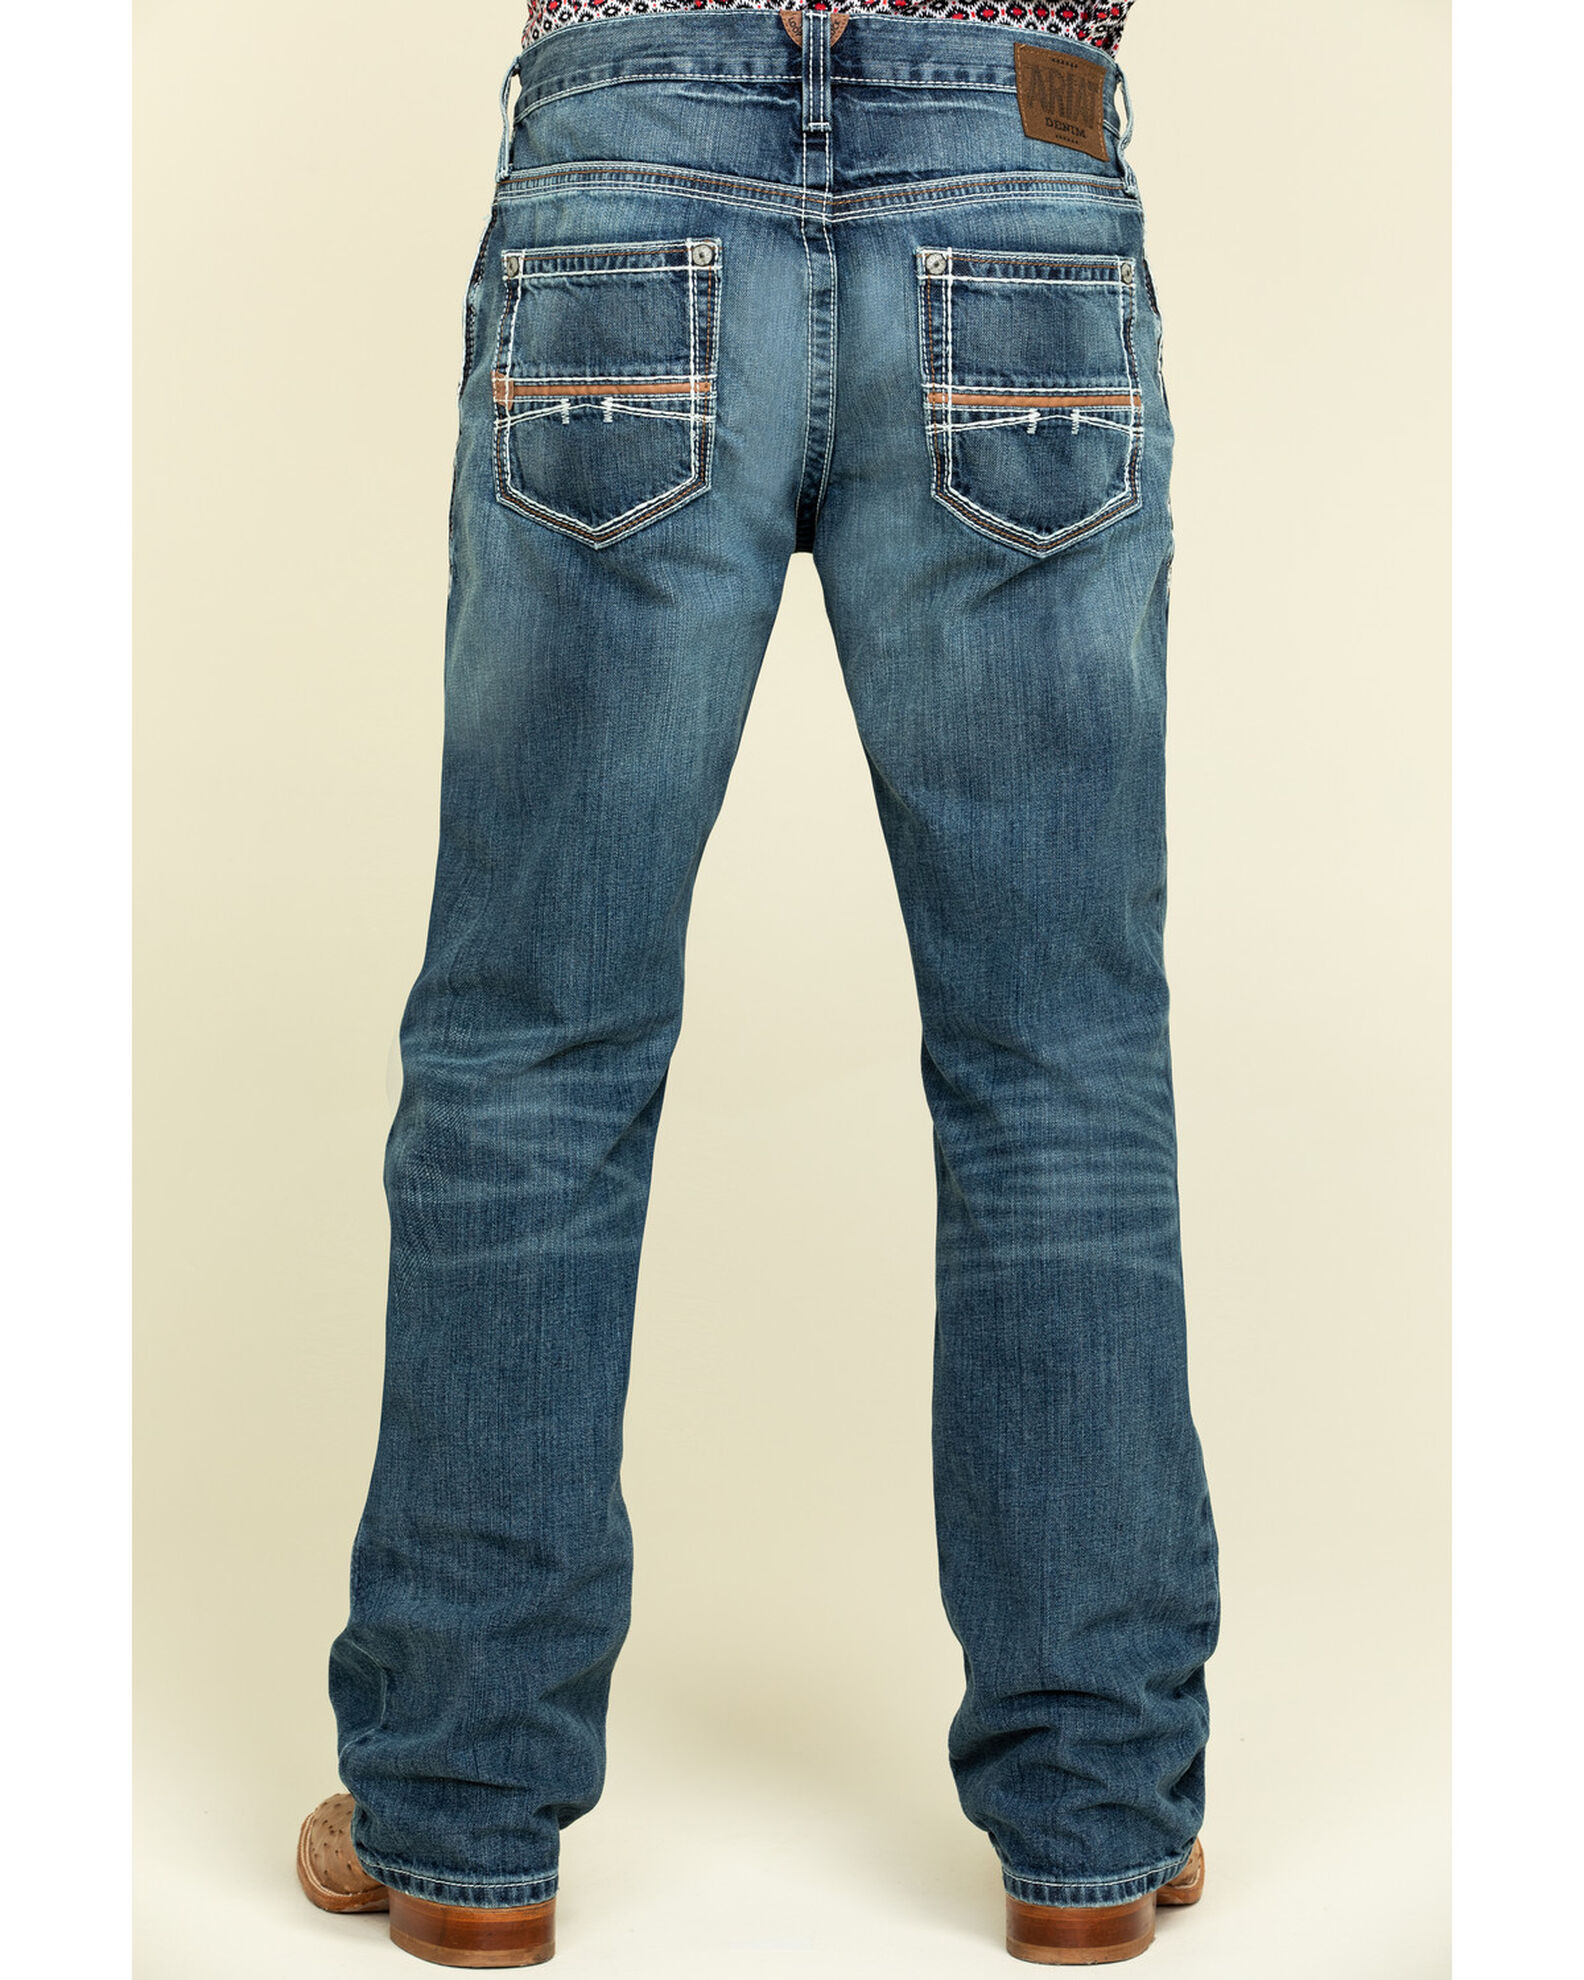 Product Name: Ariat Men's M4 Coltrane Durango Medium Wash Low Rise Relaxed  Bootcut Jeans